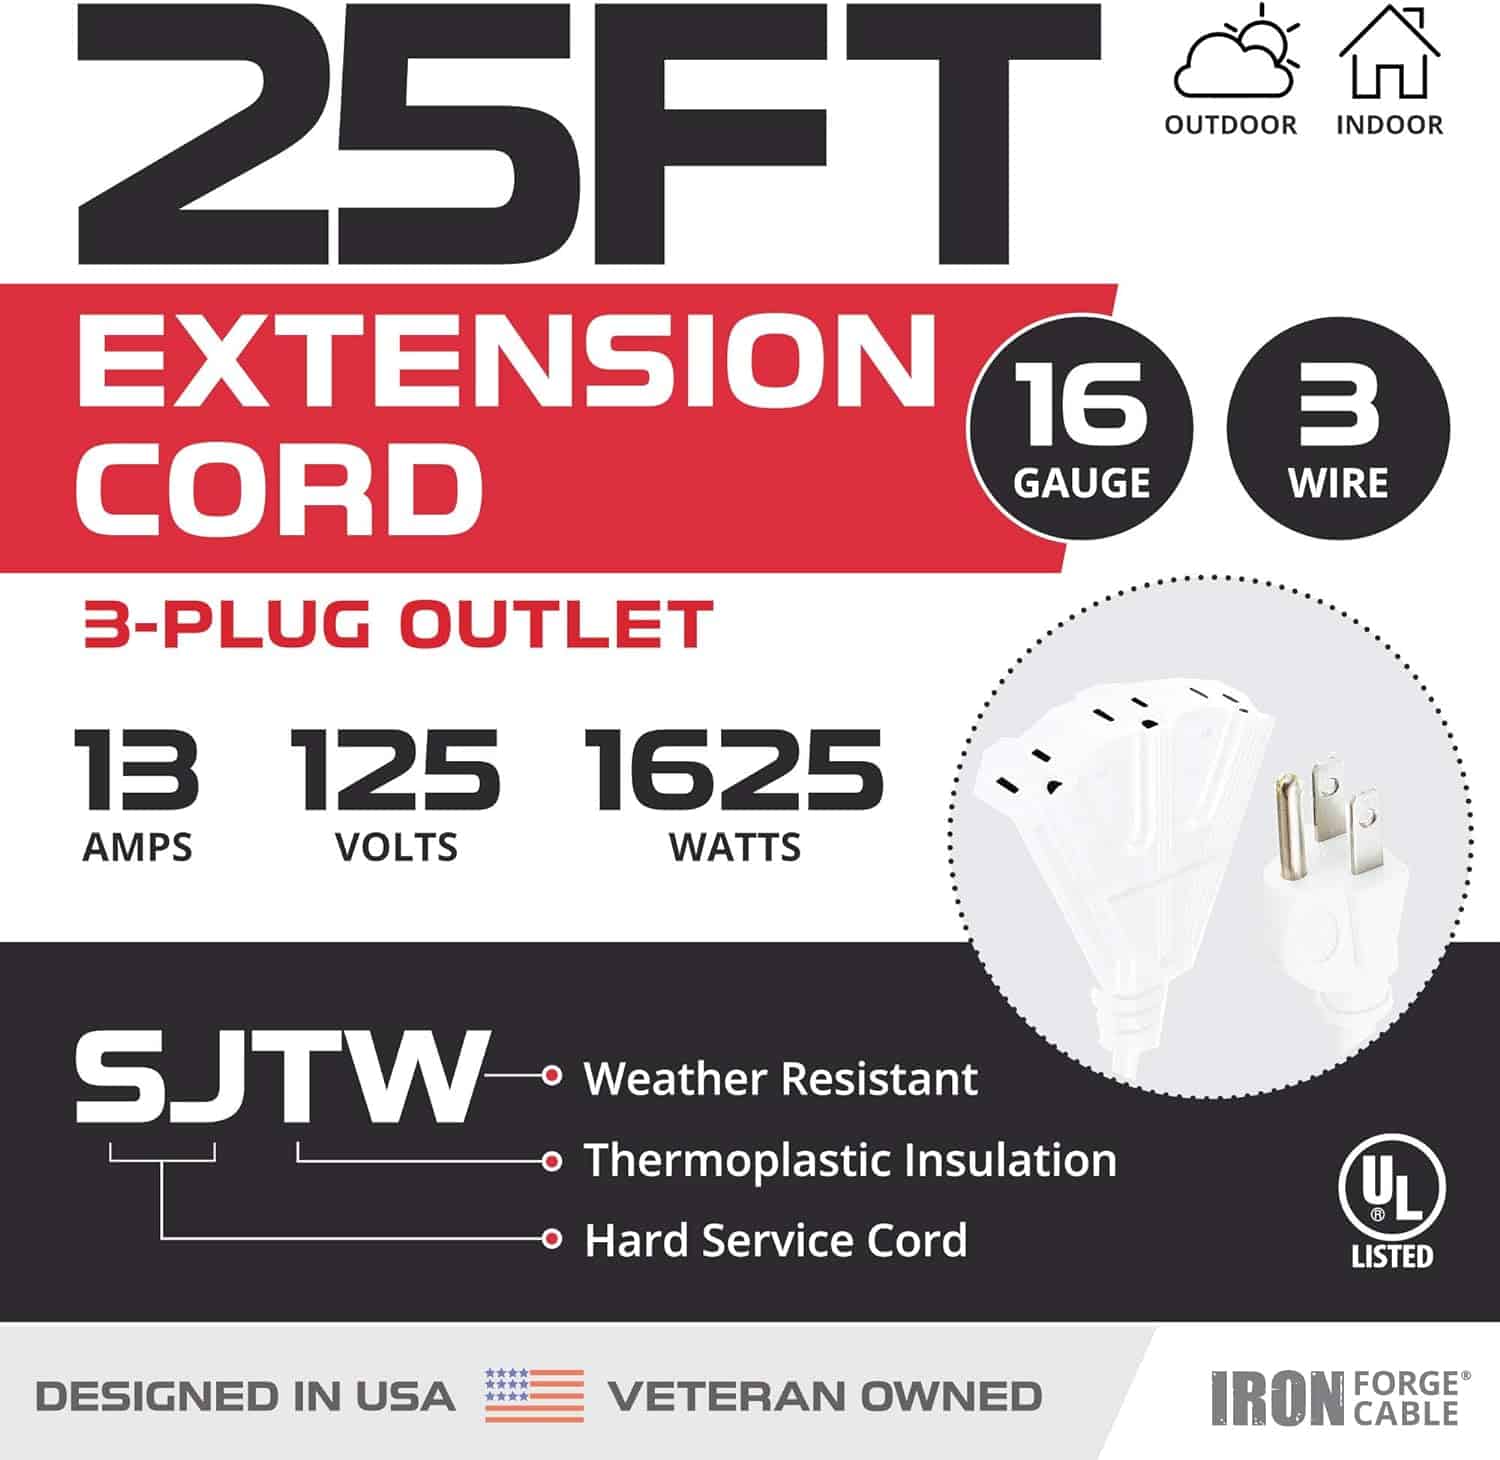 Iron-Forge-Cable-25-Ft-Extension-Cord-3-Outlets-3-Prong16-3-Weatherproof-White-Extension-Cord-with-Multiple-Outlets-25-Foot-13-Amp-SJTW-Outlet-Extender-Cord-for-Indoor-Outdoor-Lights-Decoration